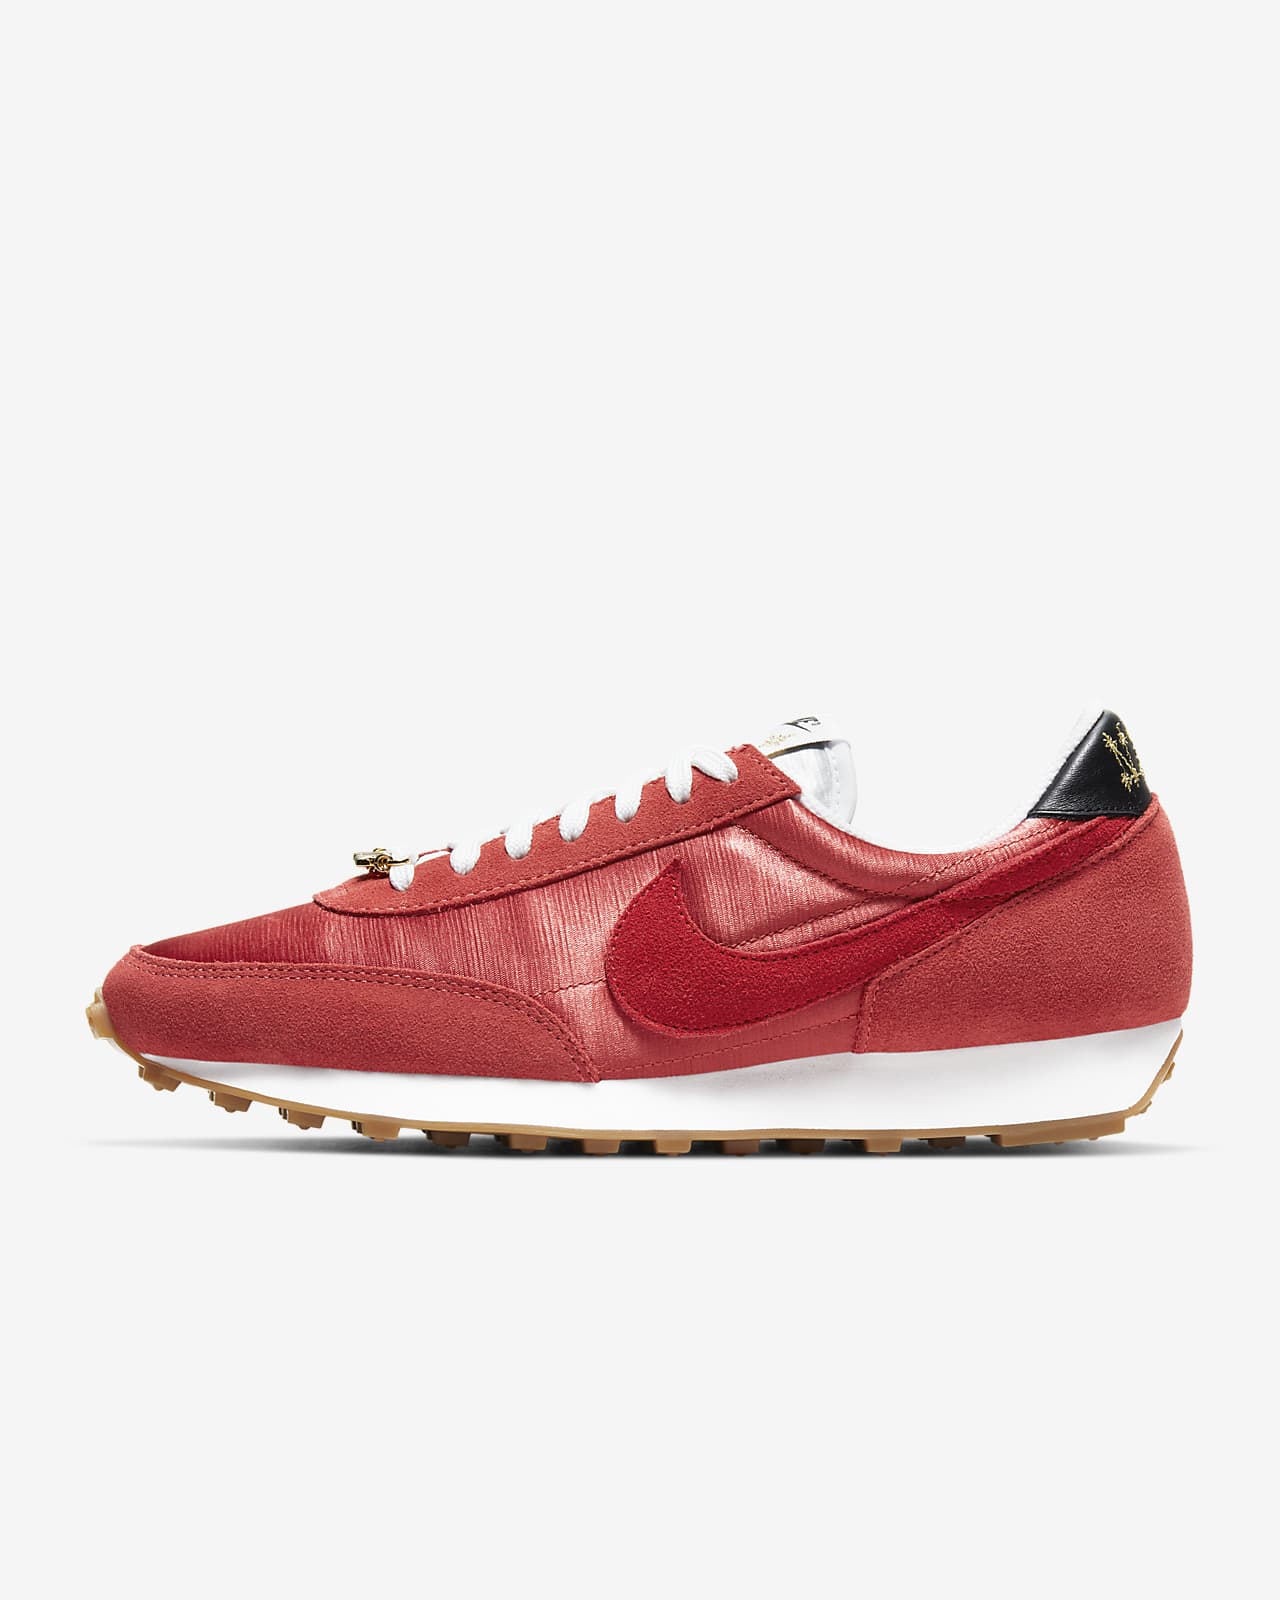 red nike shoes woman